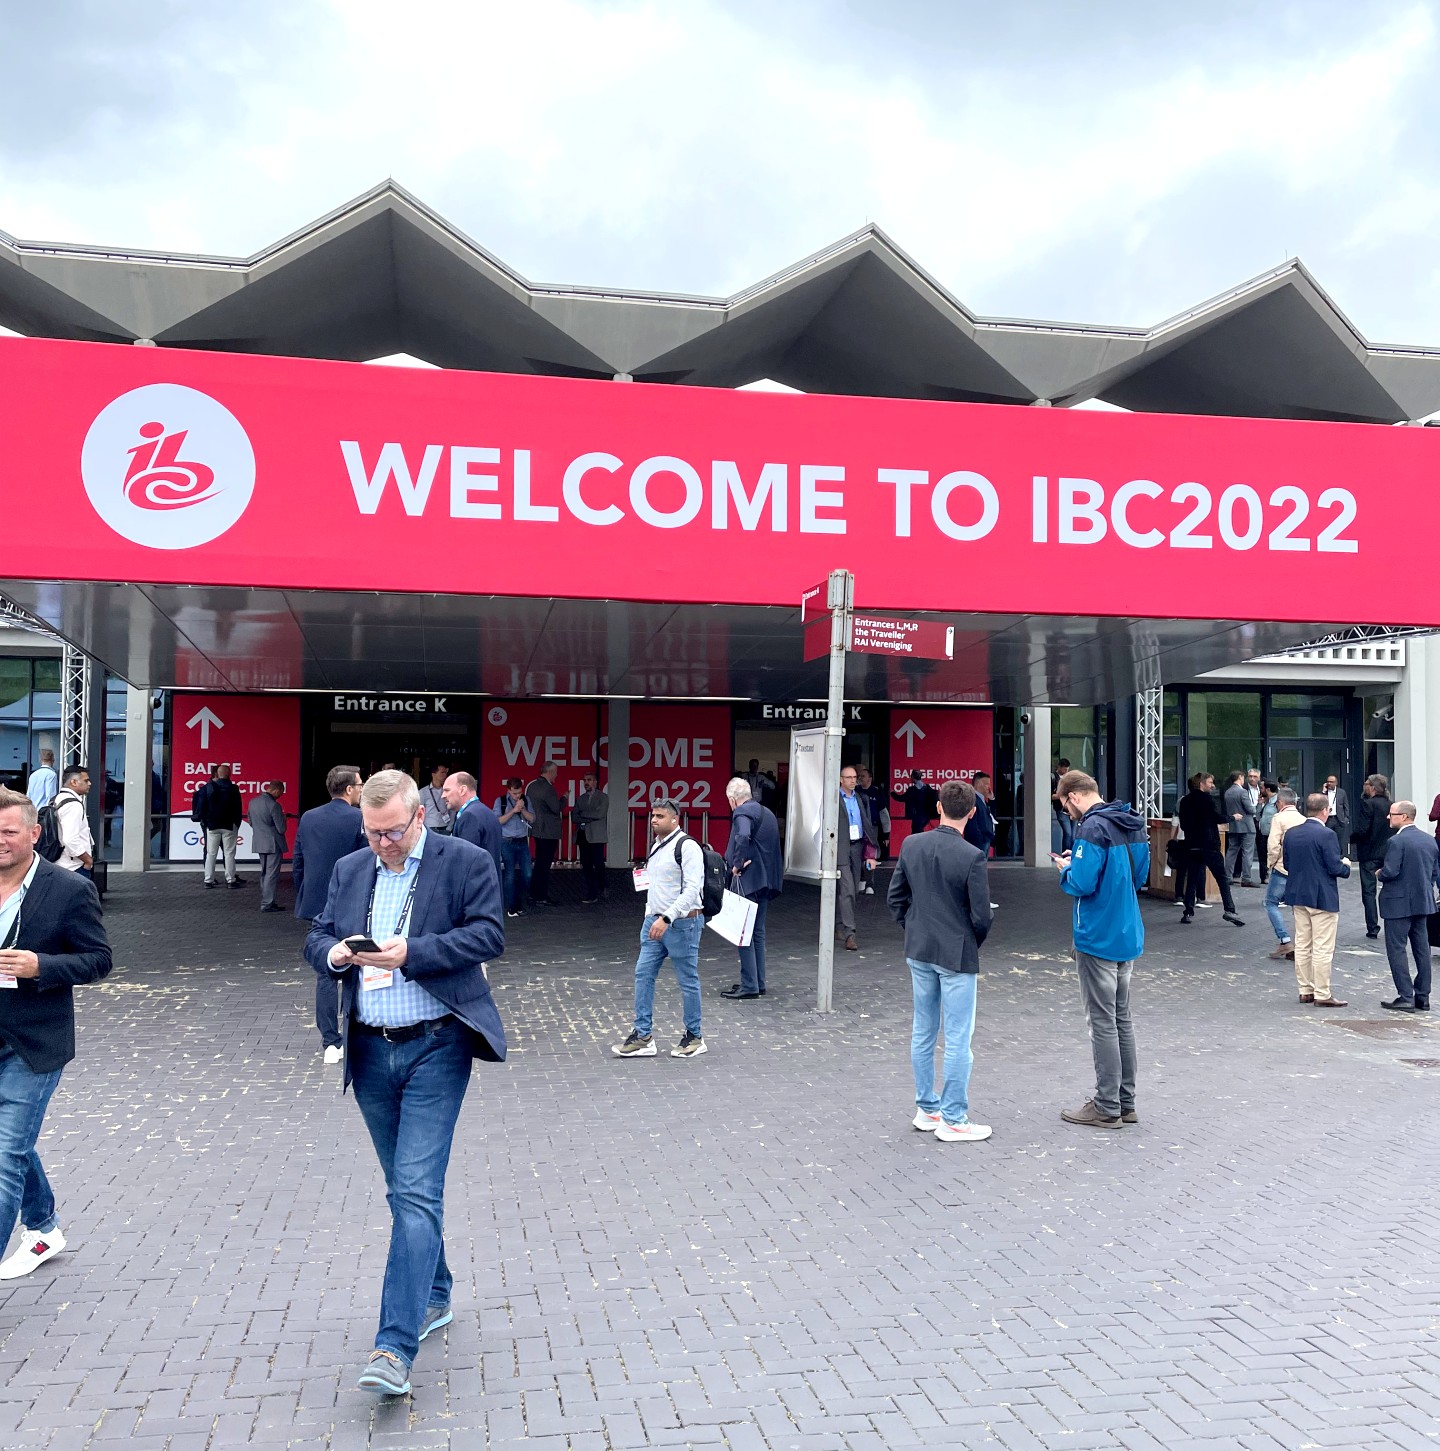 Photo of the entrance to the International Broadcasting Convention event, with a large banner that says "Welcome to IBC2022".